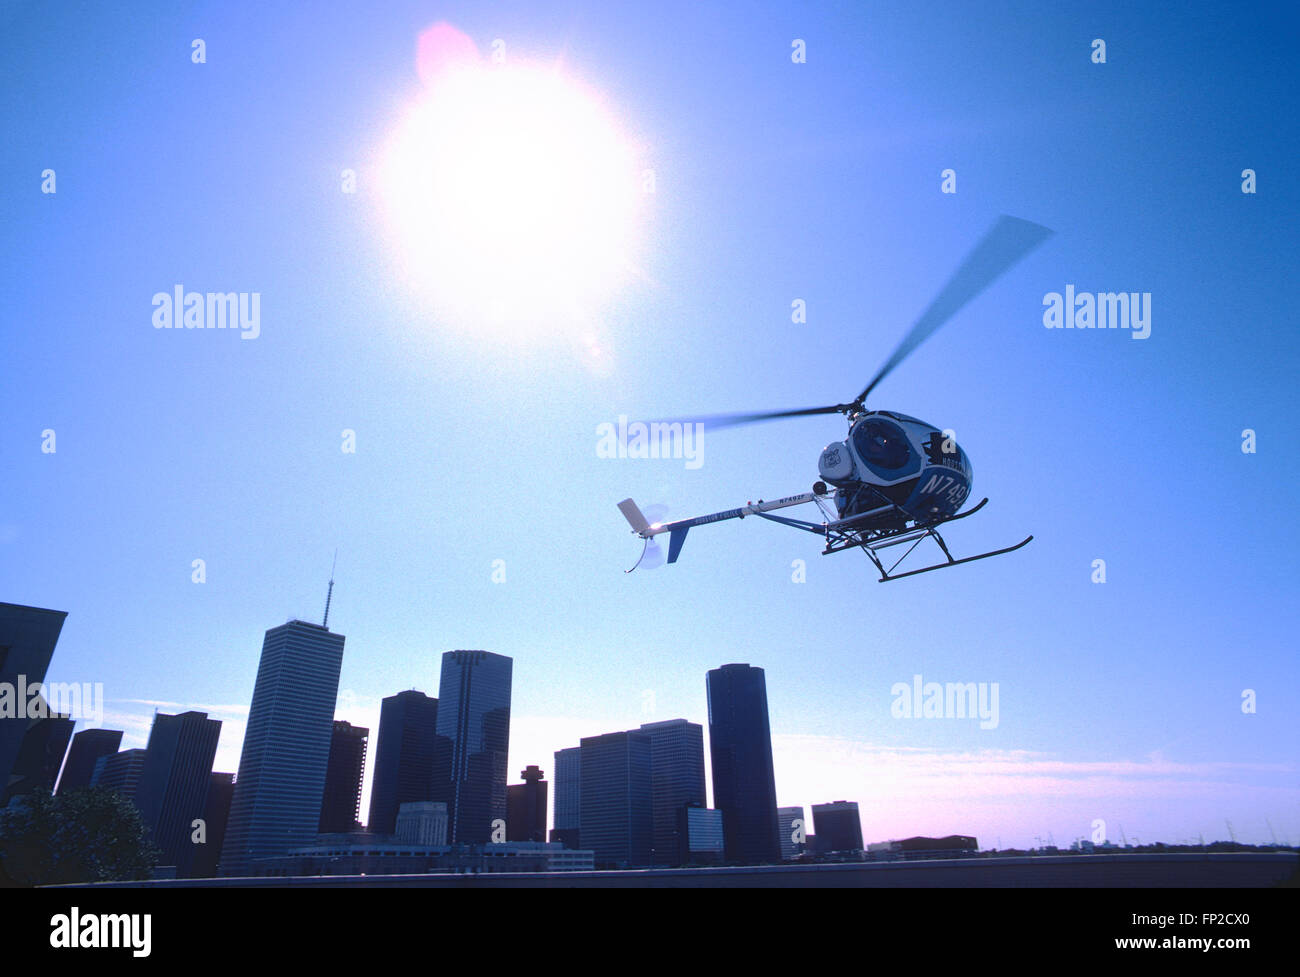 Houston Police helicopter taking off from top of tall building Stock Photo